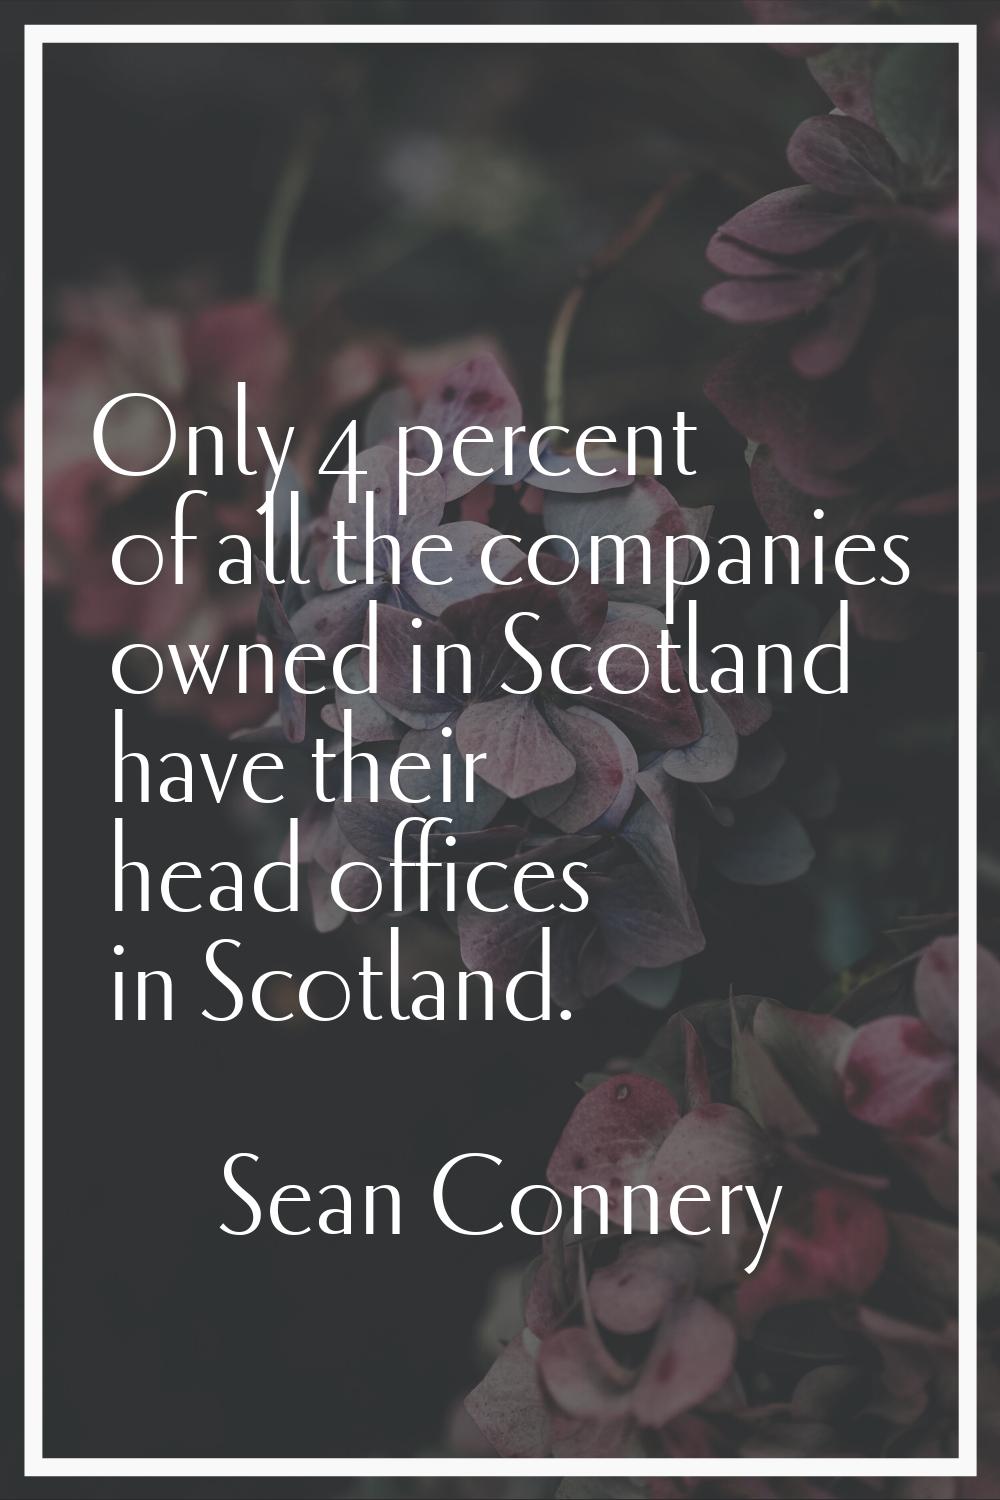 Only 4 percent of all the companies owned in Scotland have their head offices in Scotland.